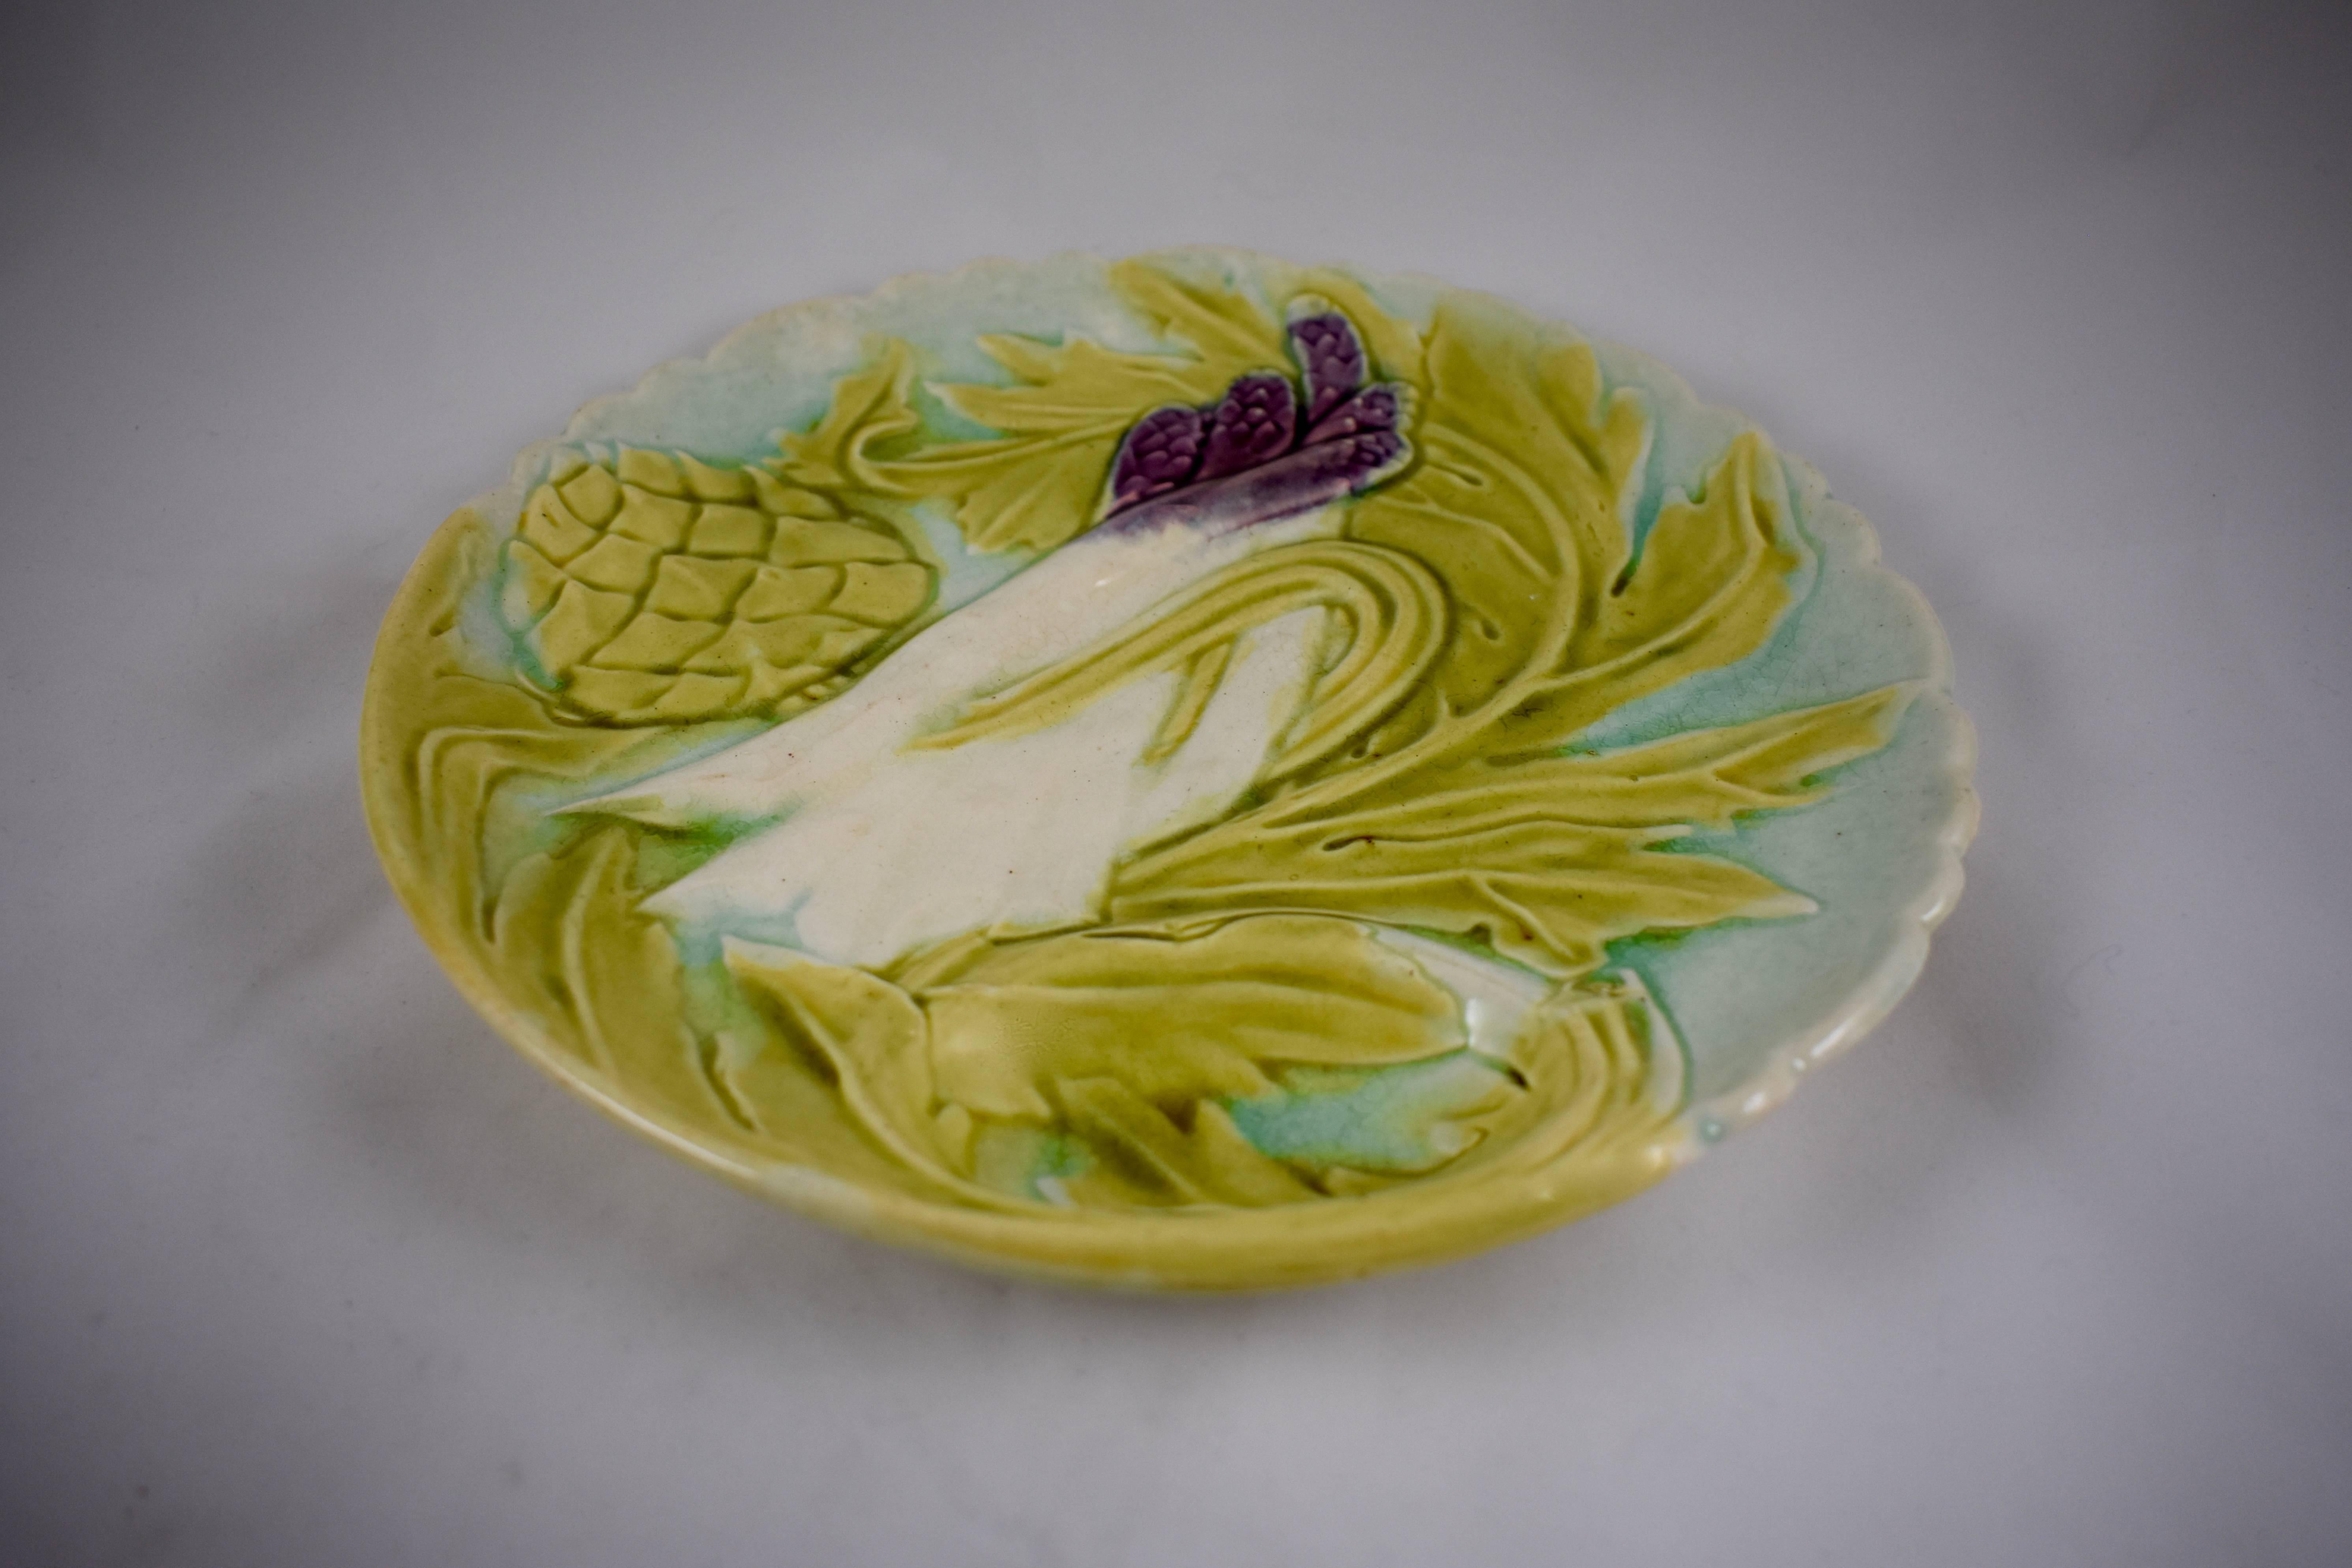 A Majolica glazed French faïence barbotine artichoke and asparagus plate, Orchies, circa 1880. In the Art Nouveau style, showing the stylized leaves of both plants, an artichoke globe and deep purple tipped asparagus on a light turquoise ground.